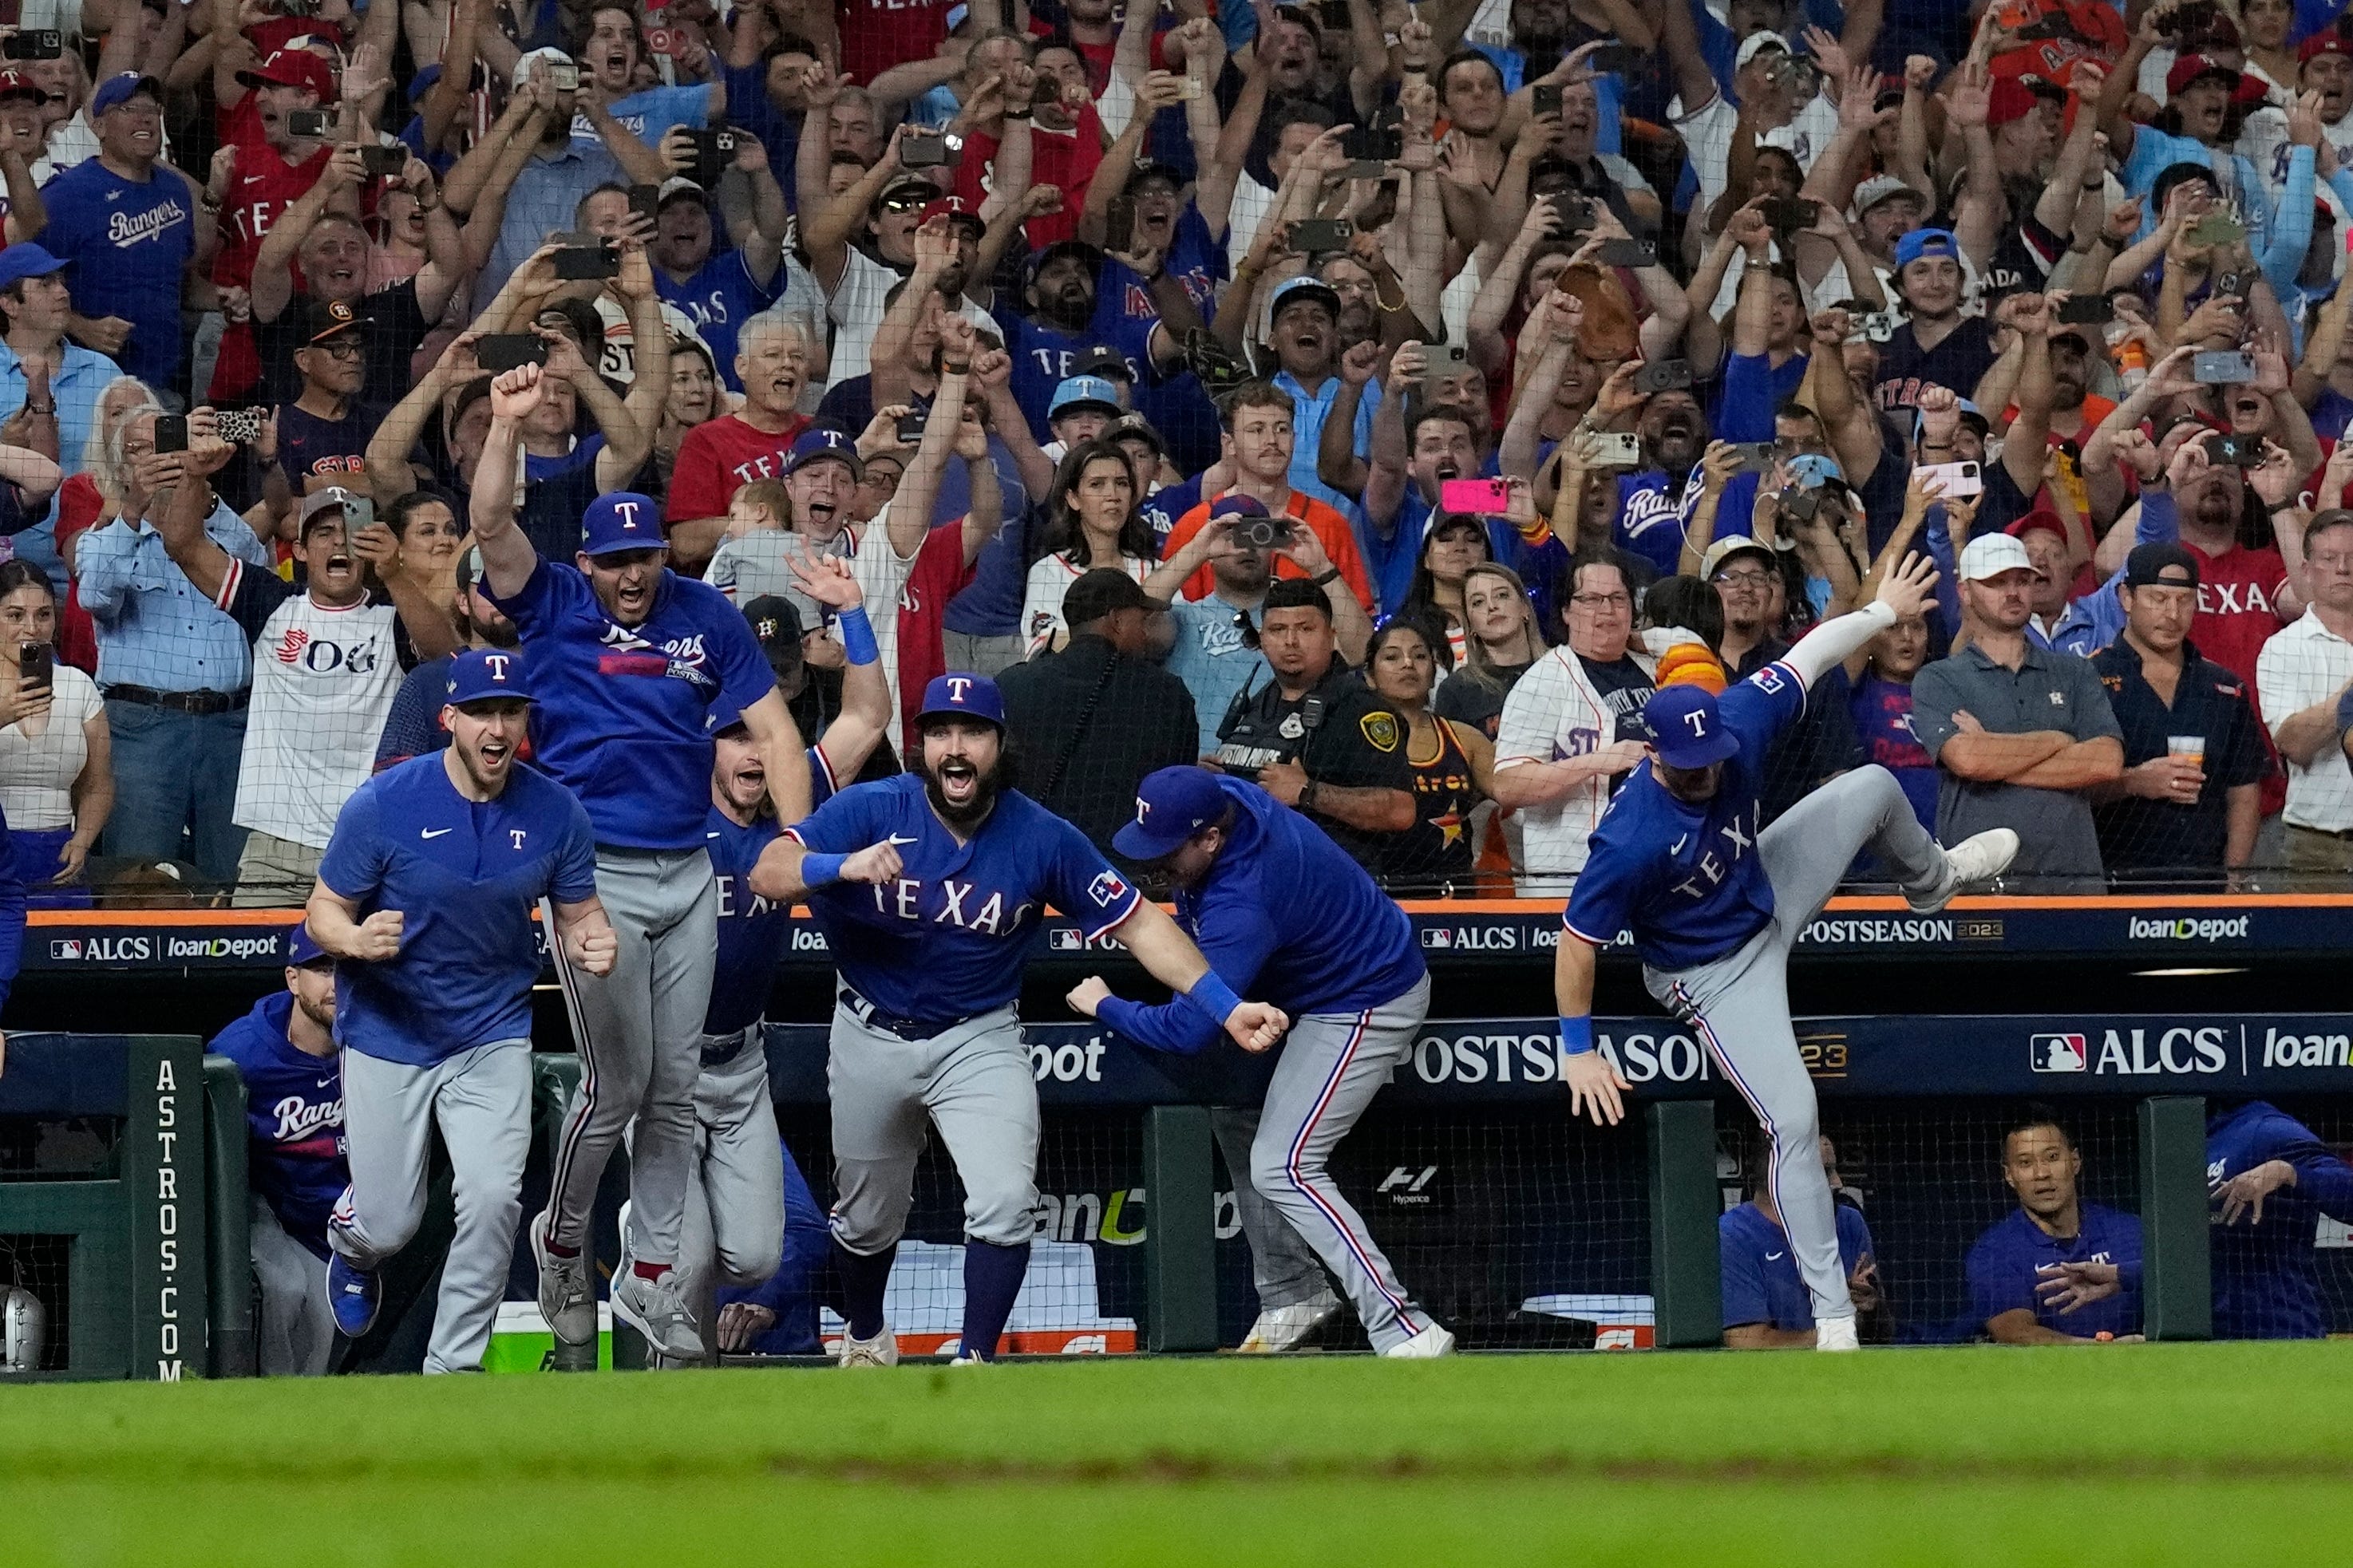 Houston and Philadelphia will face each other in the World Series